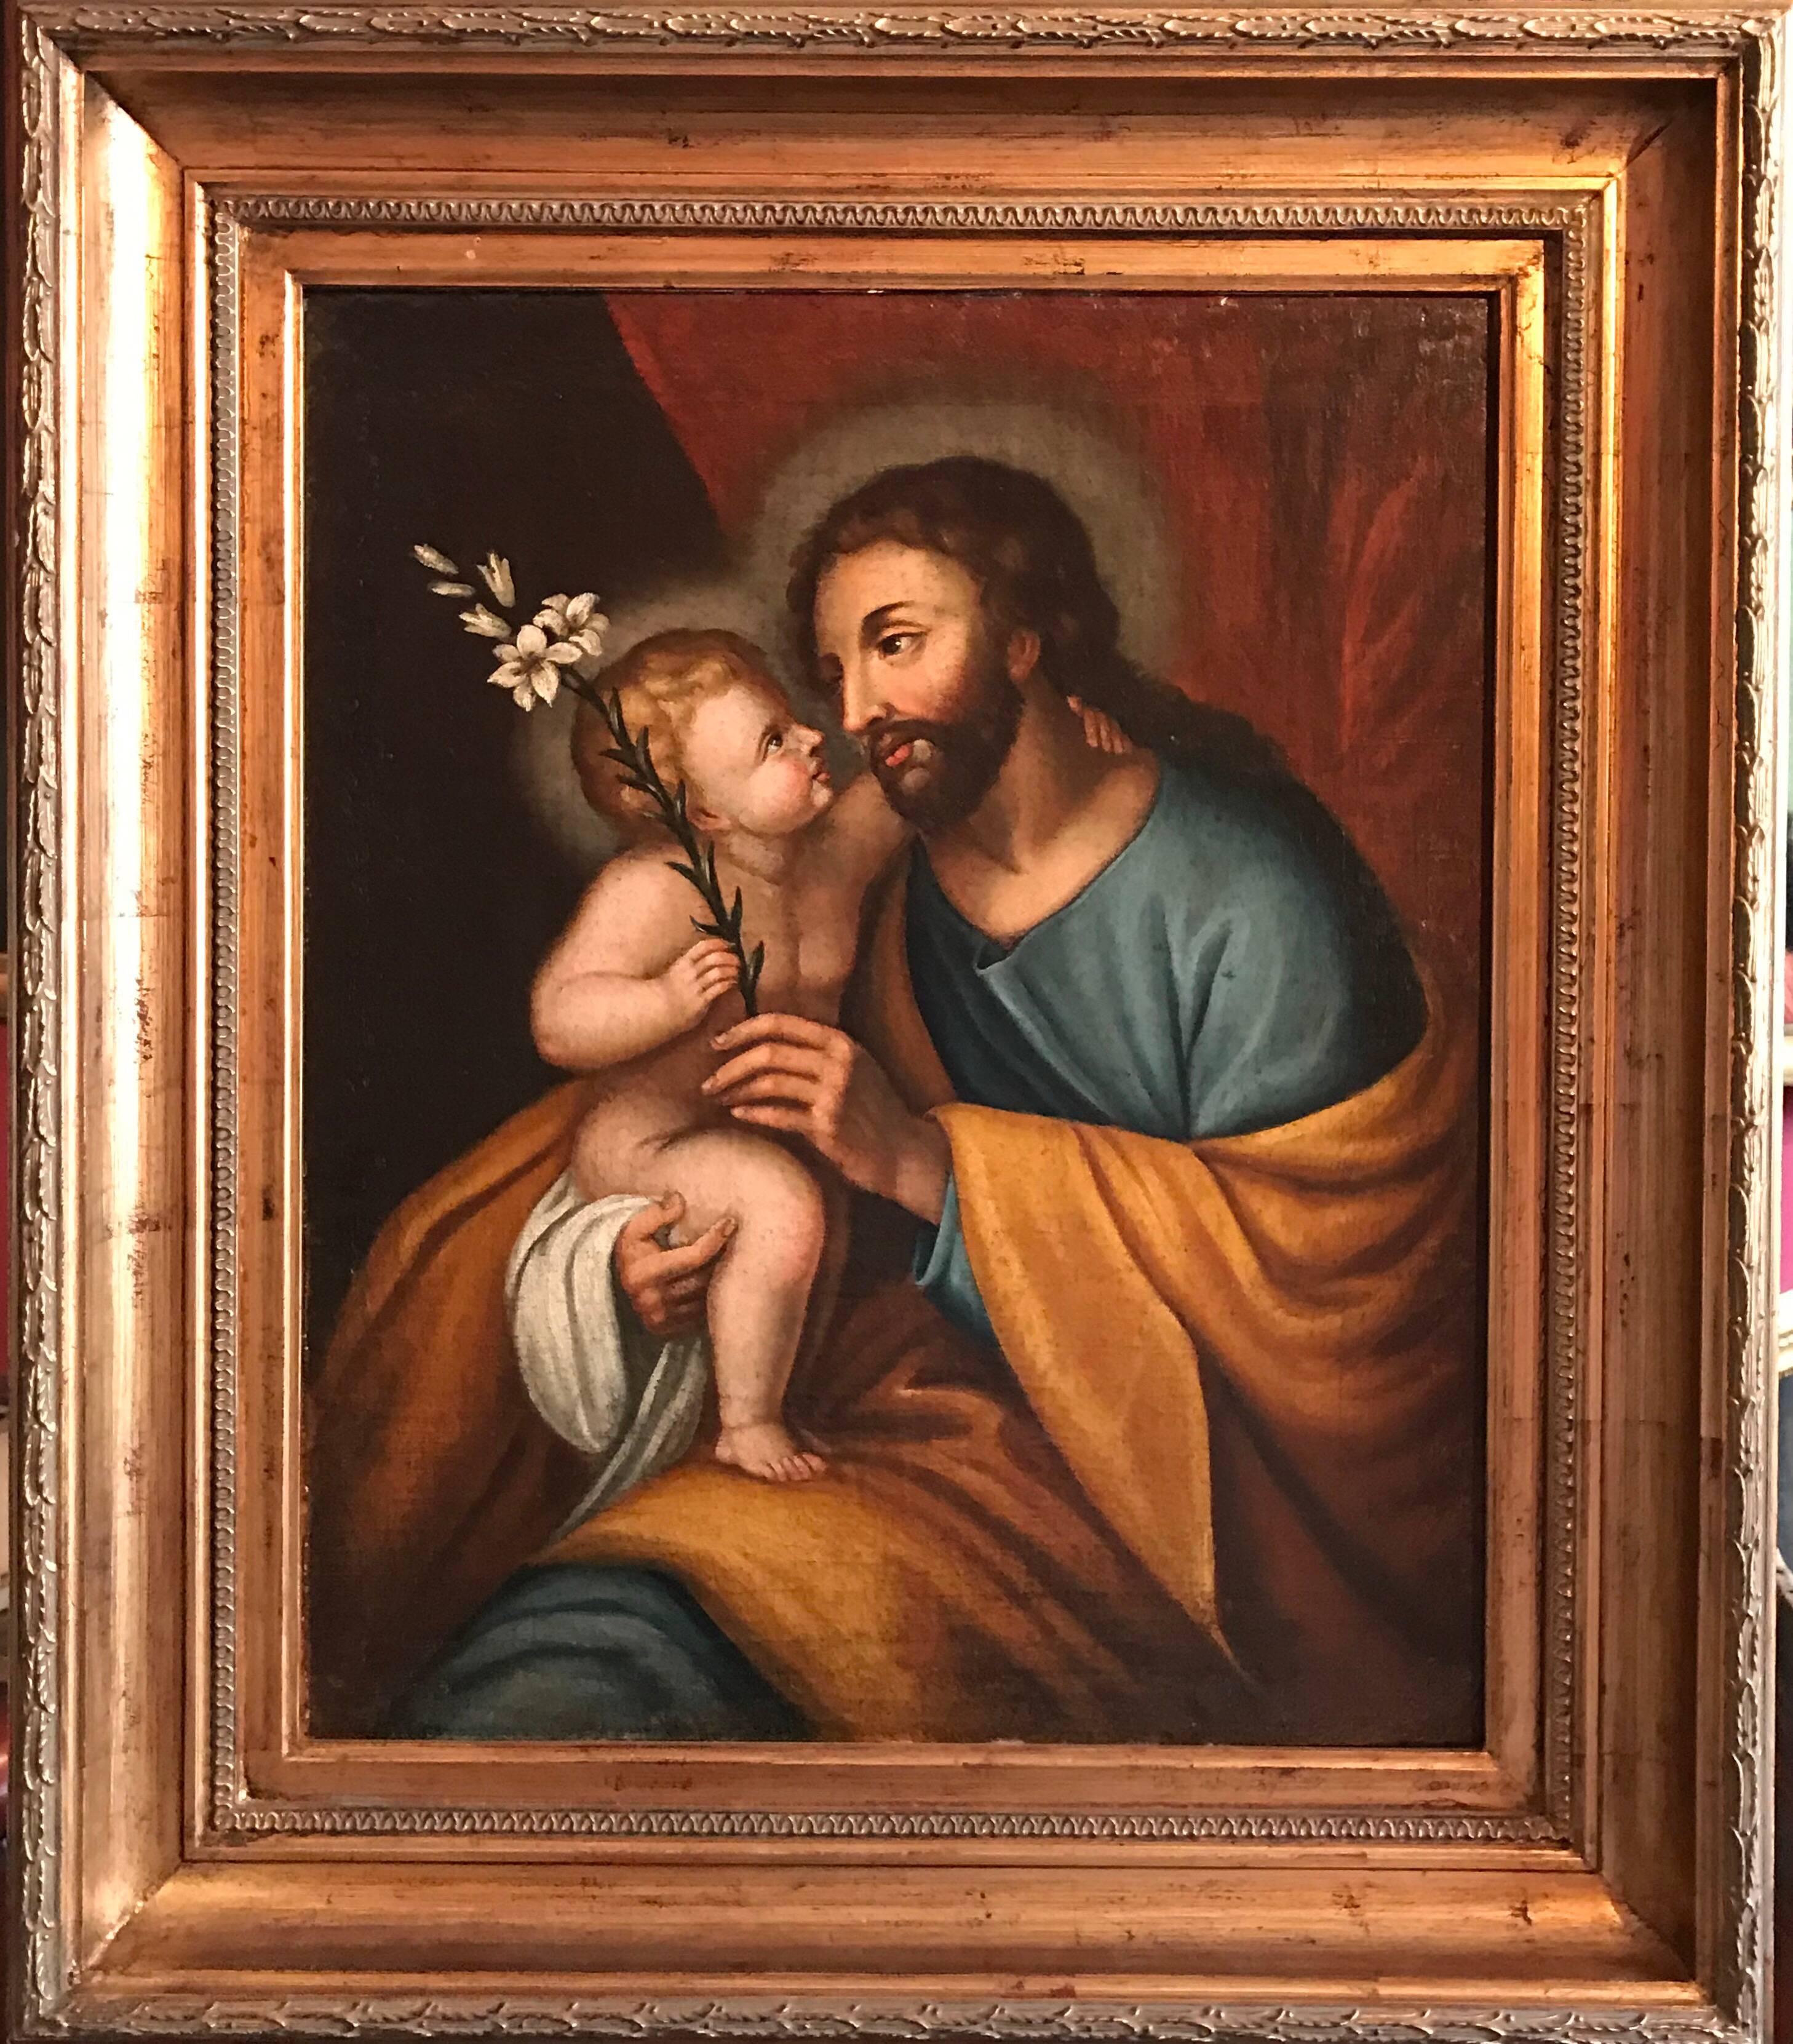 Joseph & Infant Christ Child, 17th century Old Master oil painting - Painting by Unknown